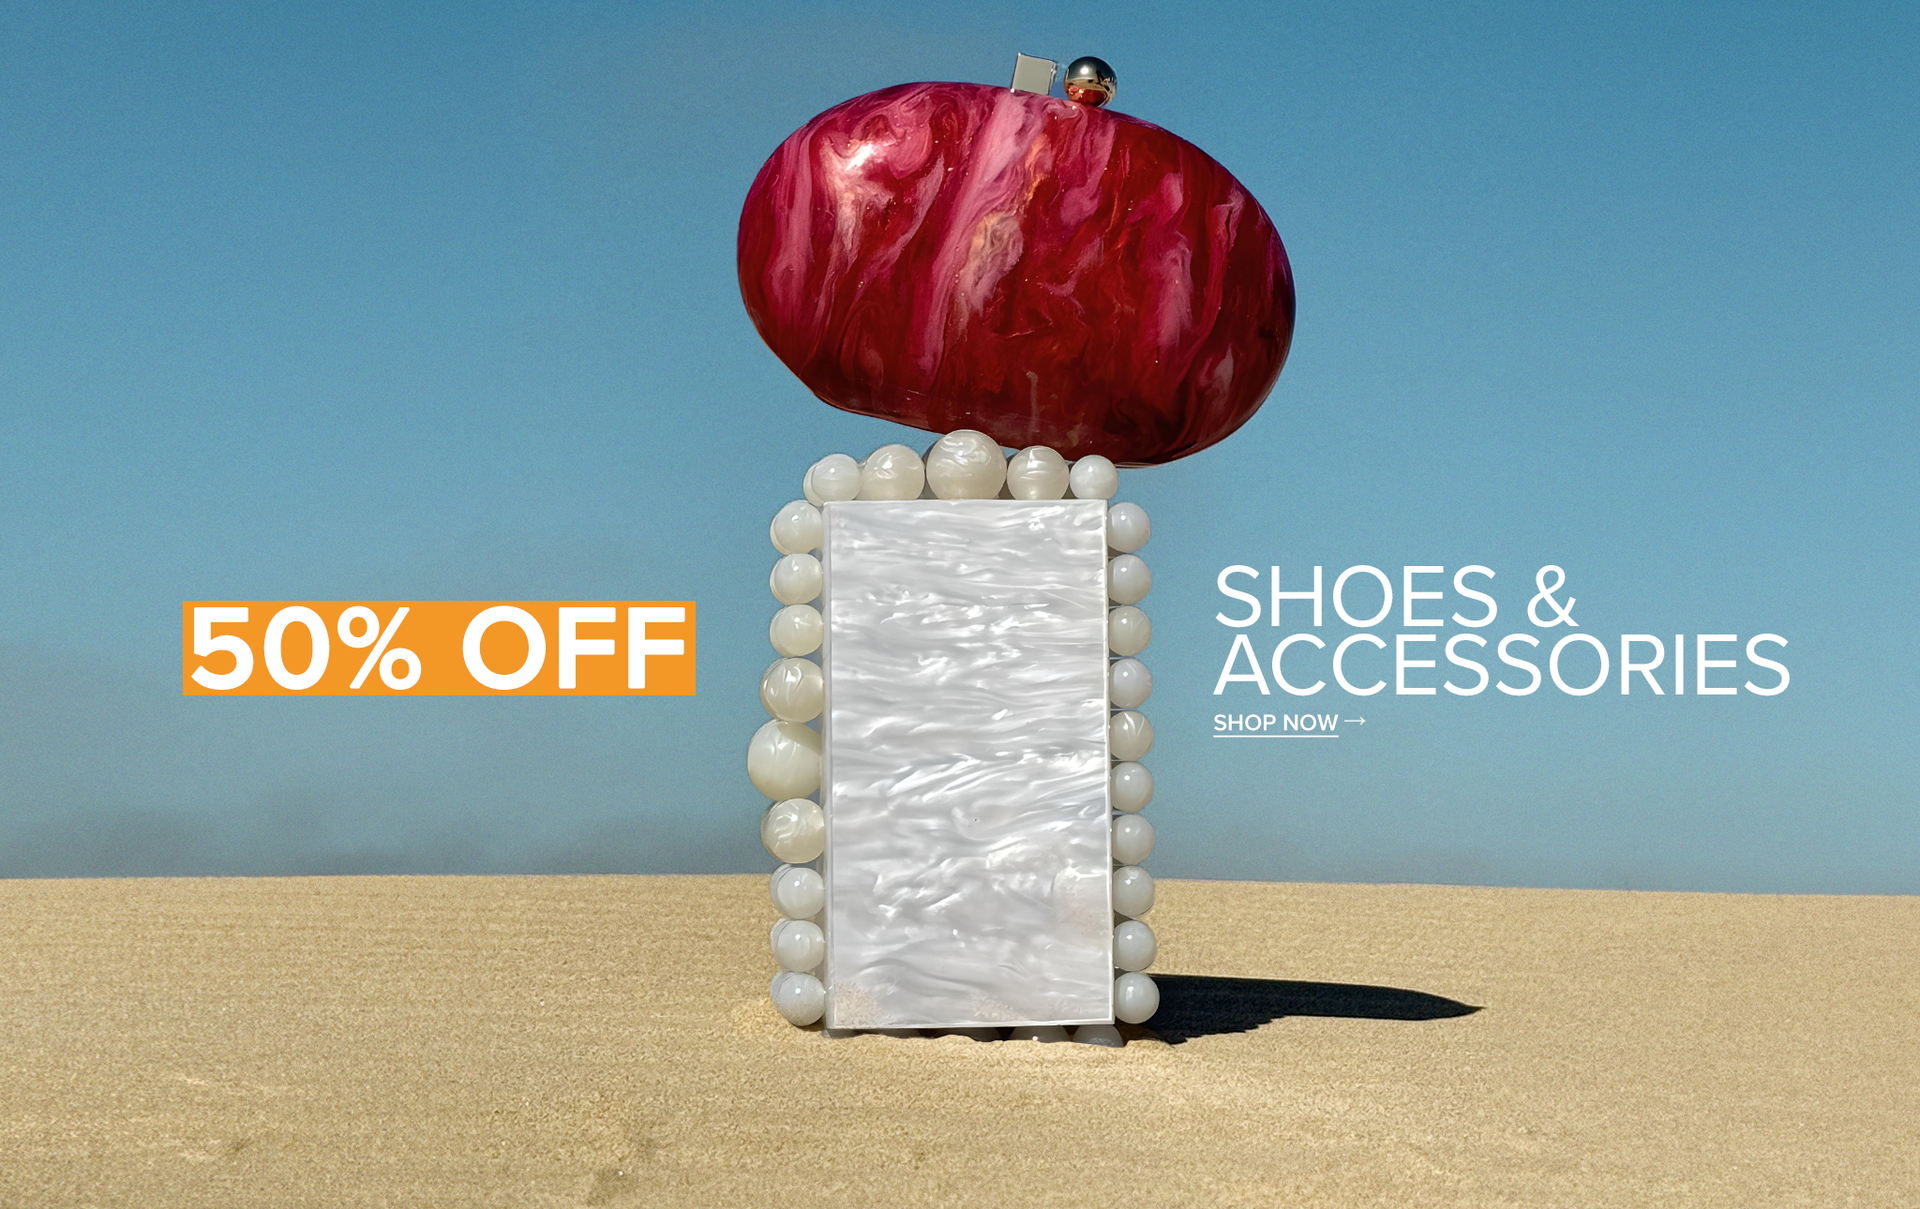 50% OFF SHOES & ACCESSORIES - 5..15.24 - JRS BANNER